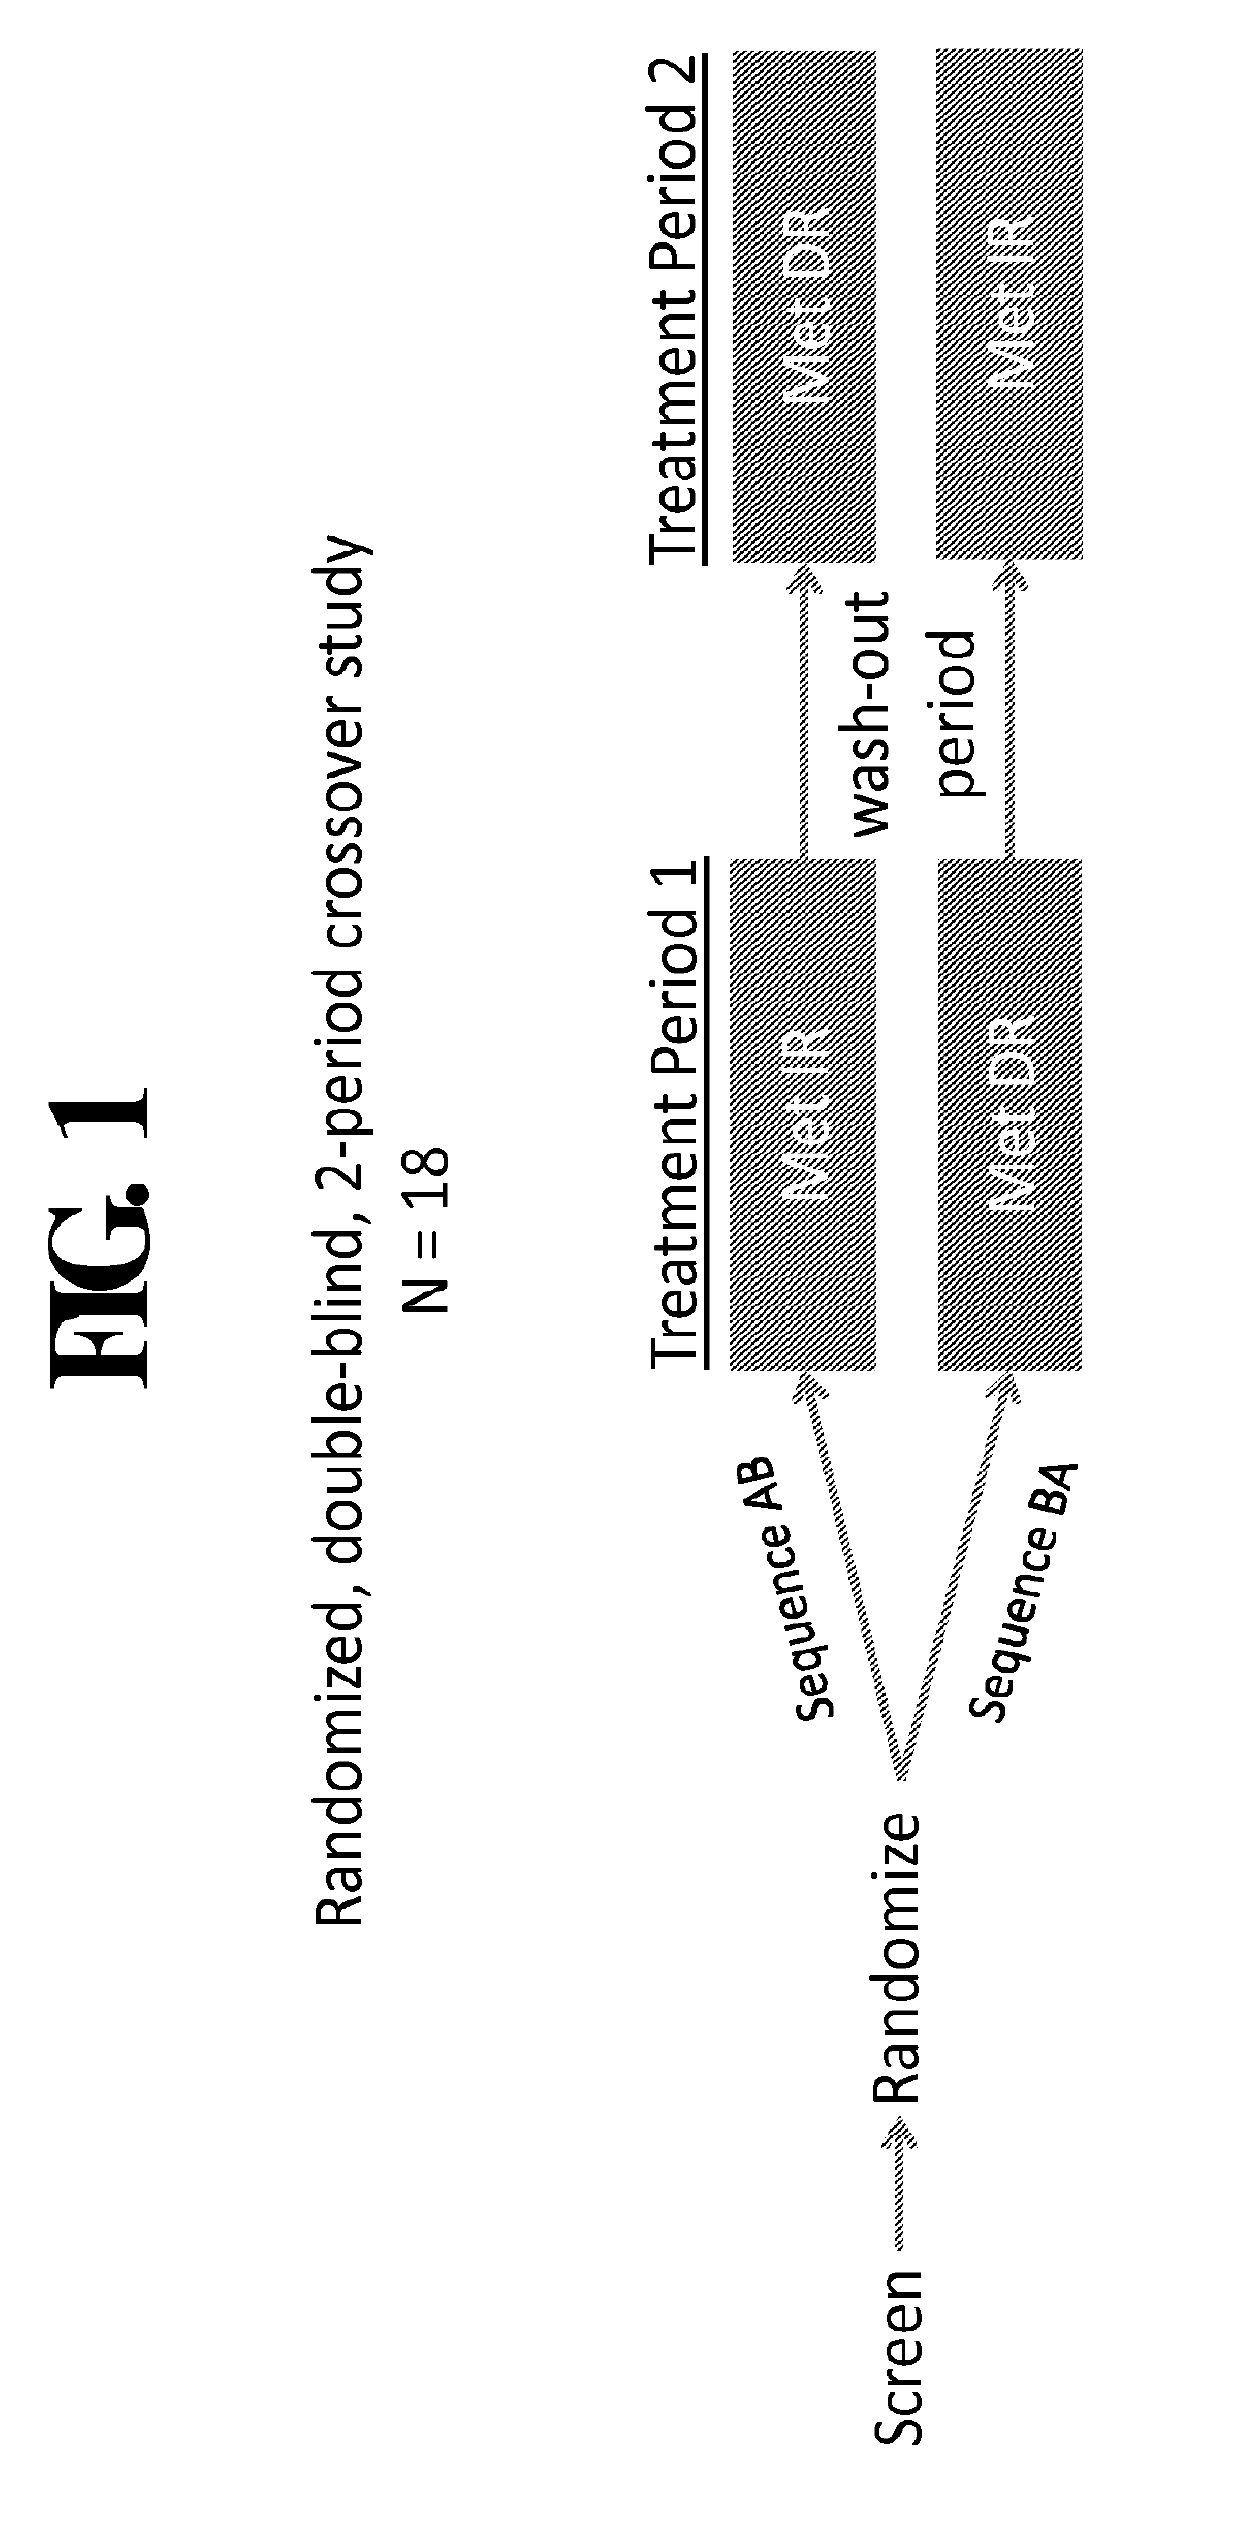 Compositions and methods for treating metabolic disorders